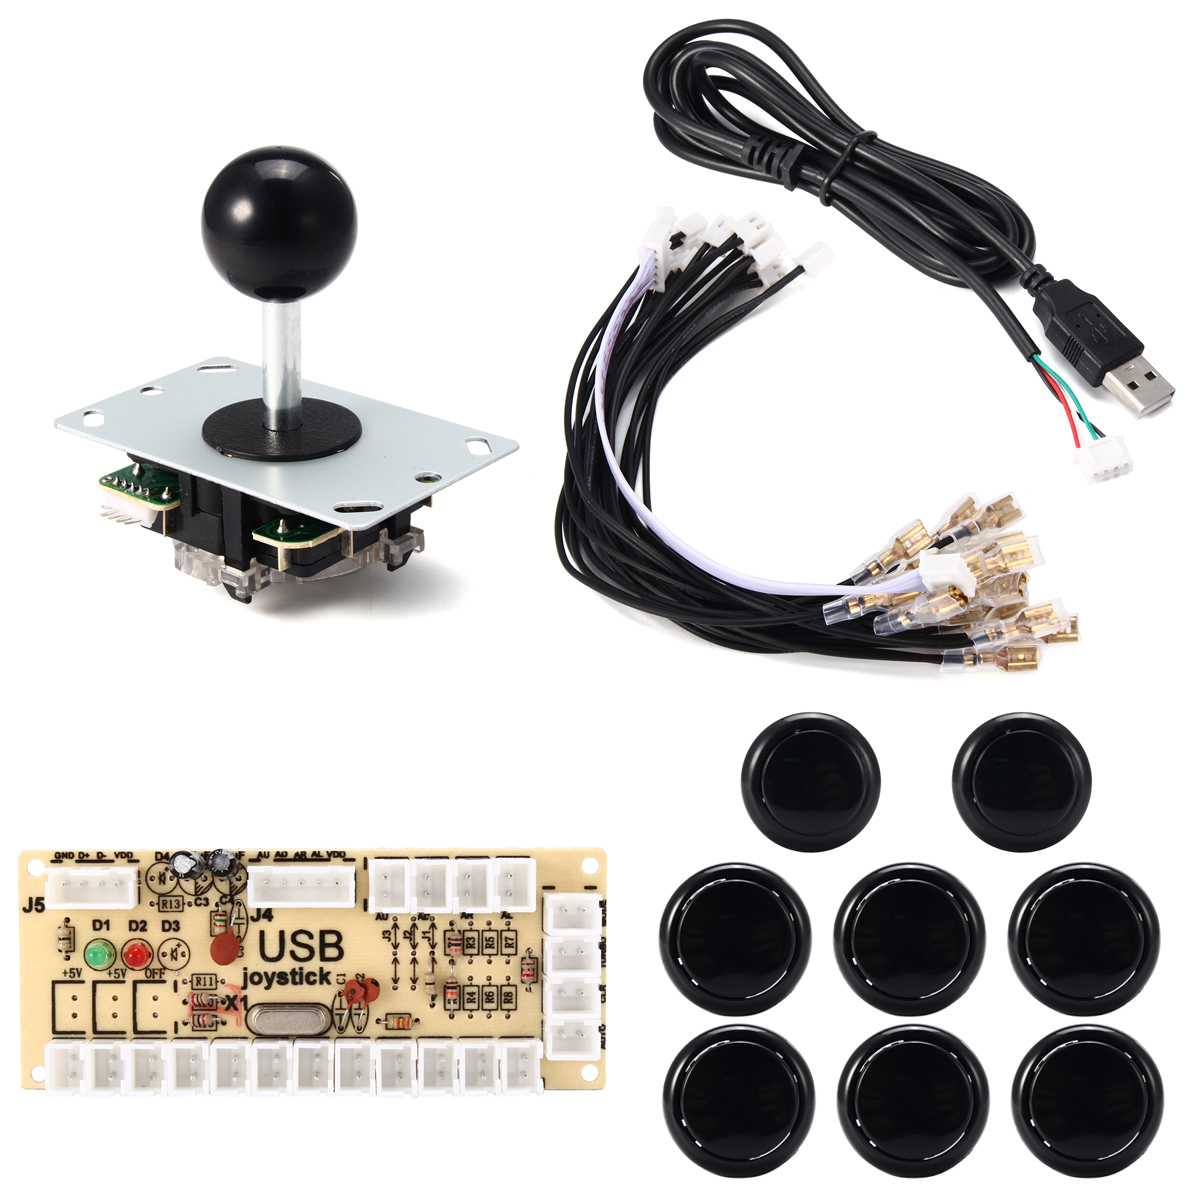 

Joystick Push Button Game Controller DIY Kit for Arcade Fighting Video Game PC